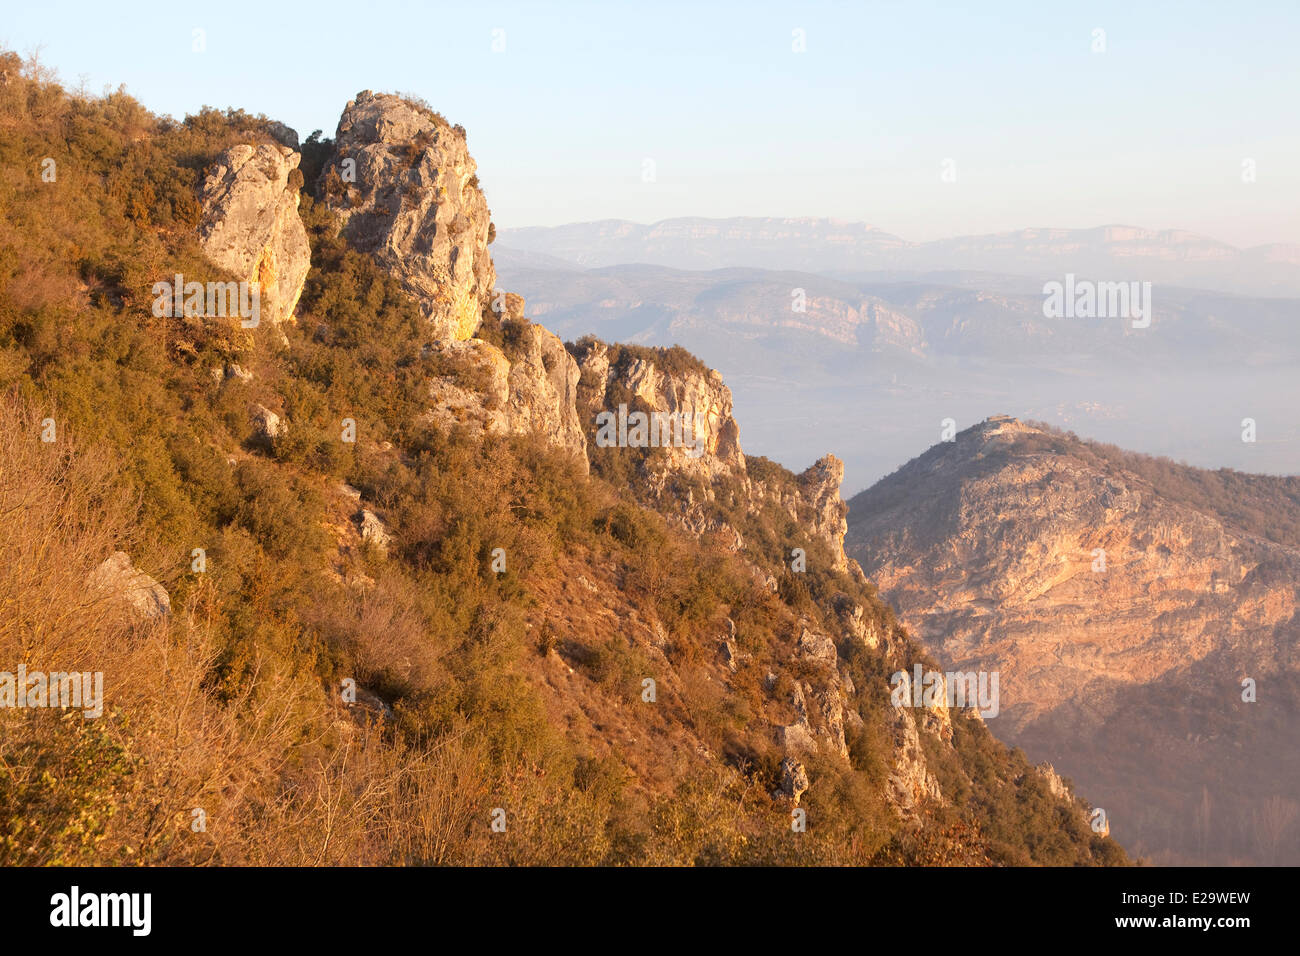 Spain, Catalonia, Lleida Province, Montsonis, landscape of scrubland in MontsonÝs Stock Photo